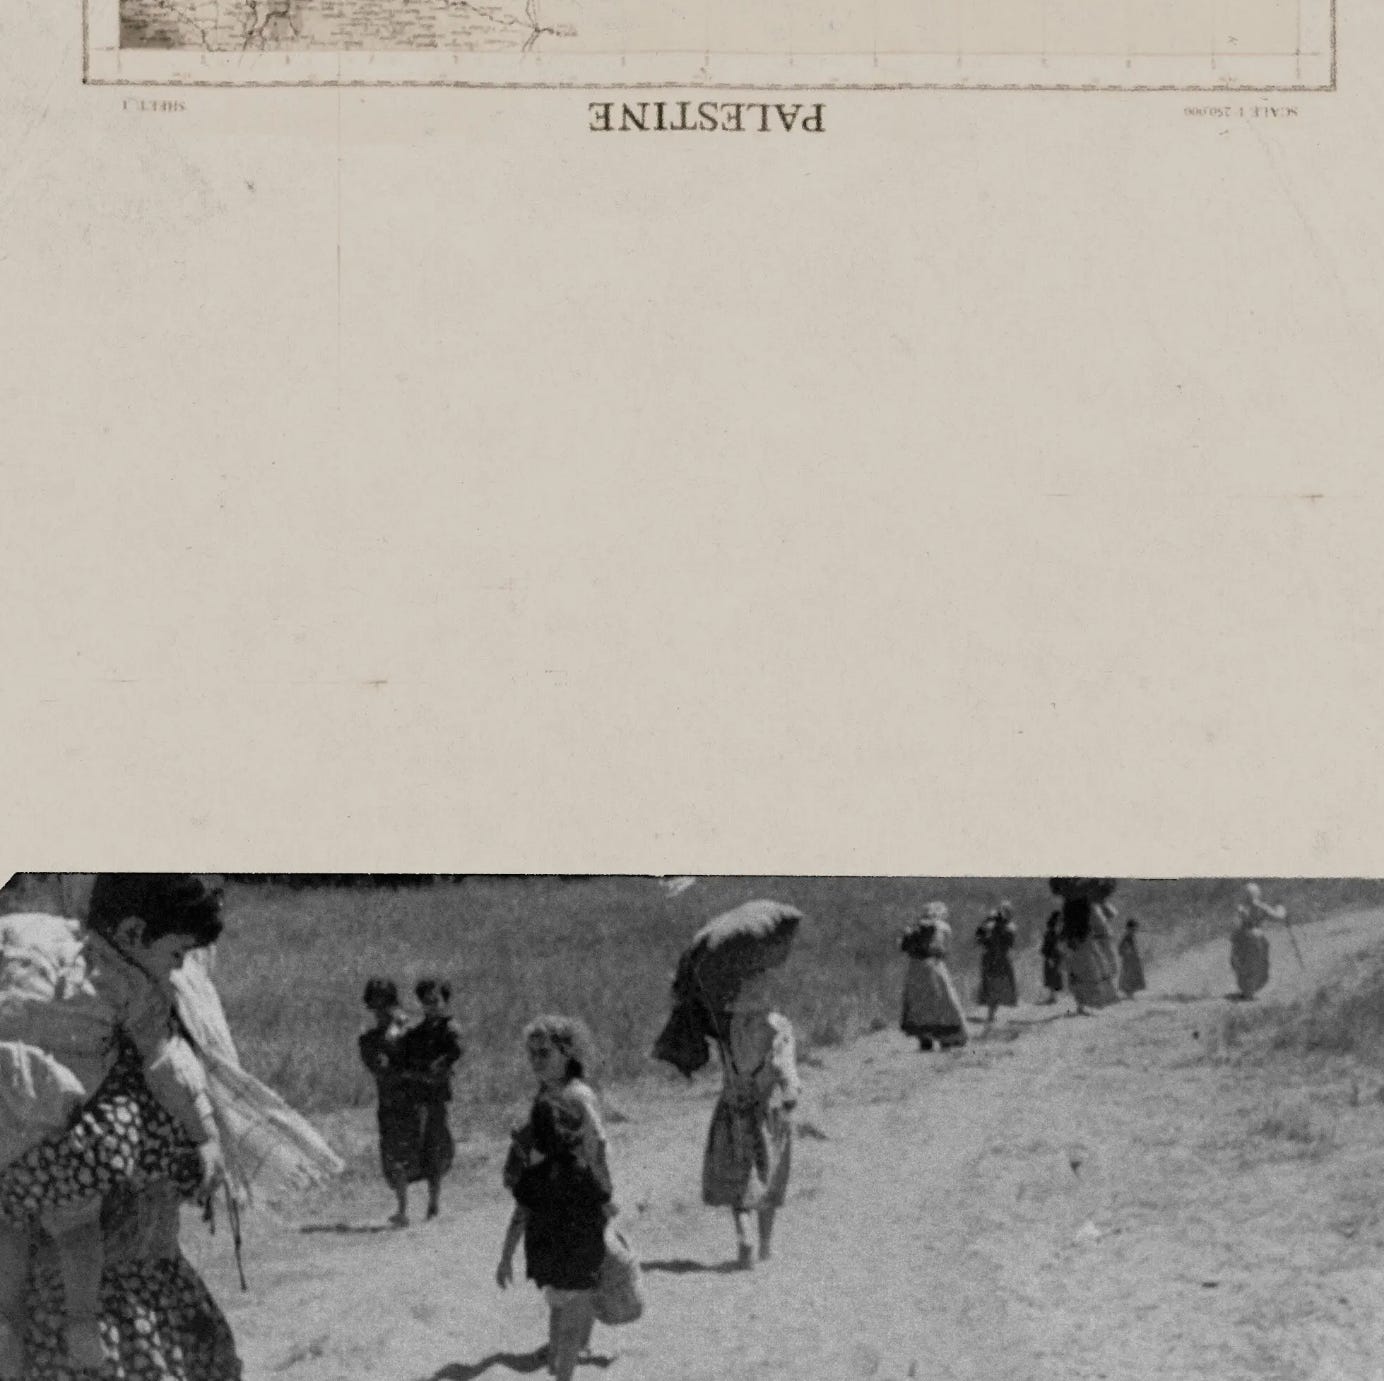 an imagine split in two parts. the top half is aged paper with a cut off image and the word "palestine" written upside down in all caps. the bottom half is a black and white image of palestinian children walking together on a dirt road.